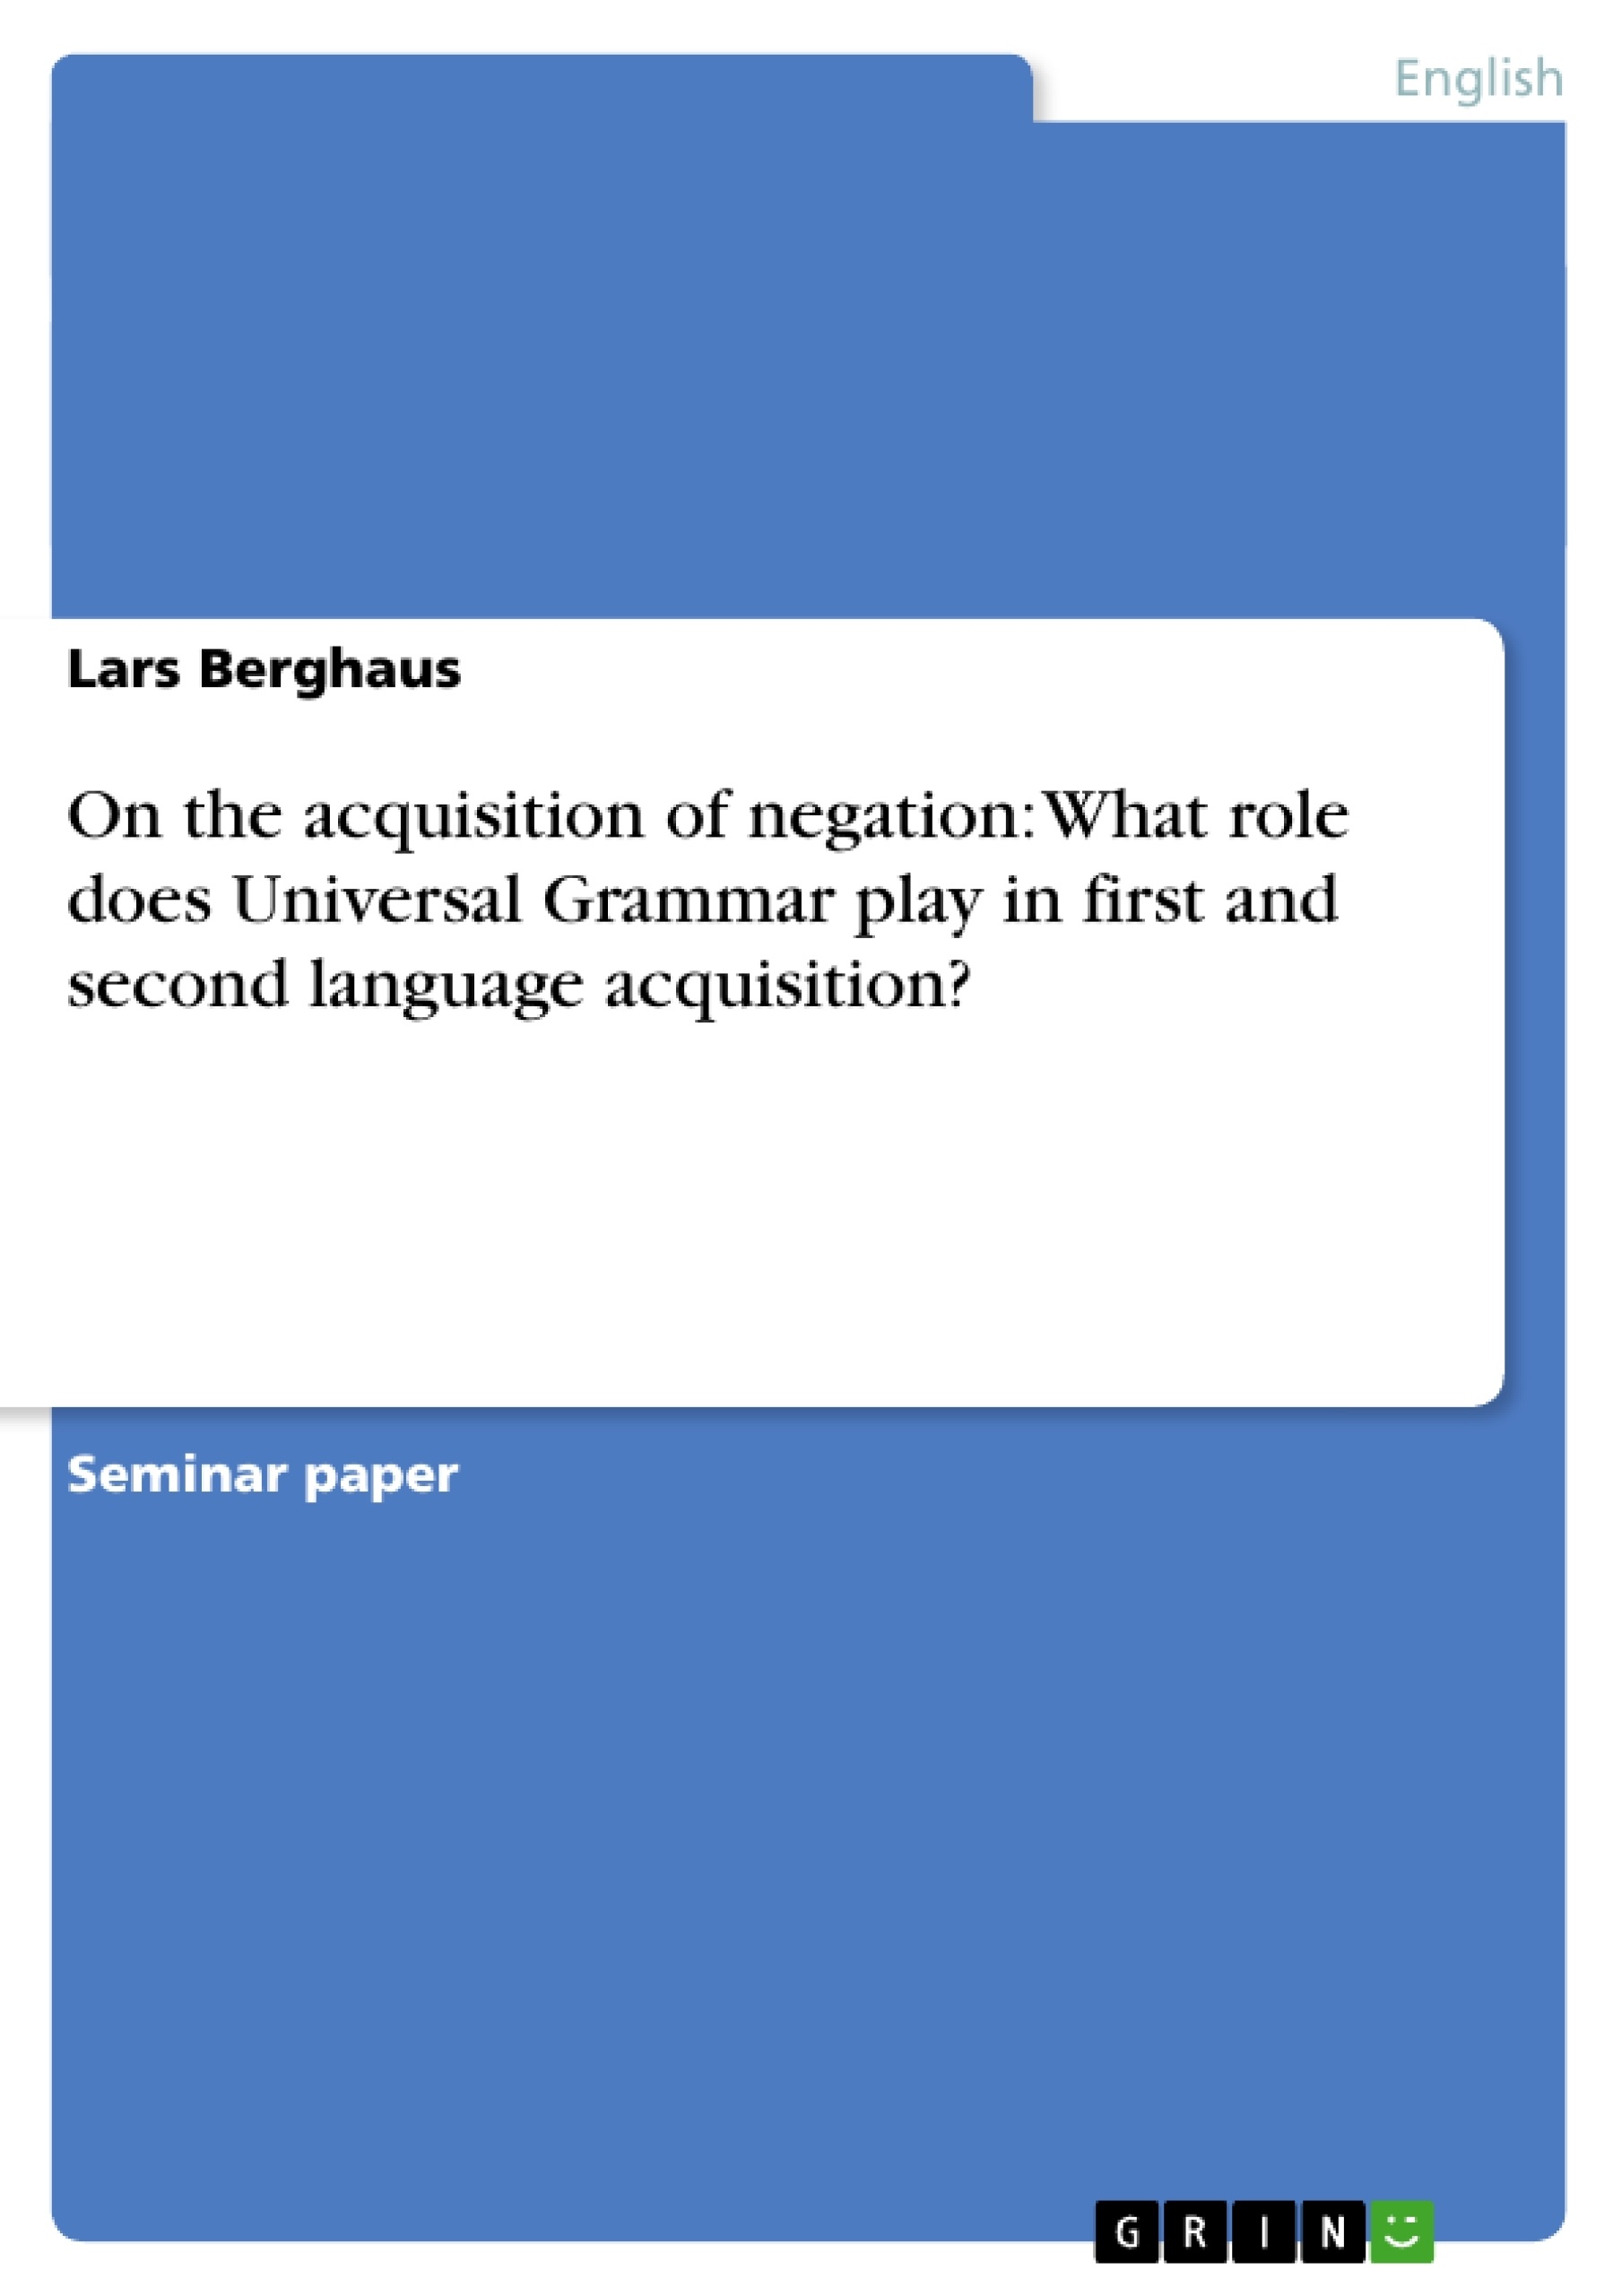 Título: On the acquisition of negation: What role does Universal Grammar play in first and second language acquisition?